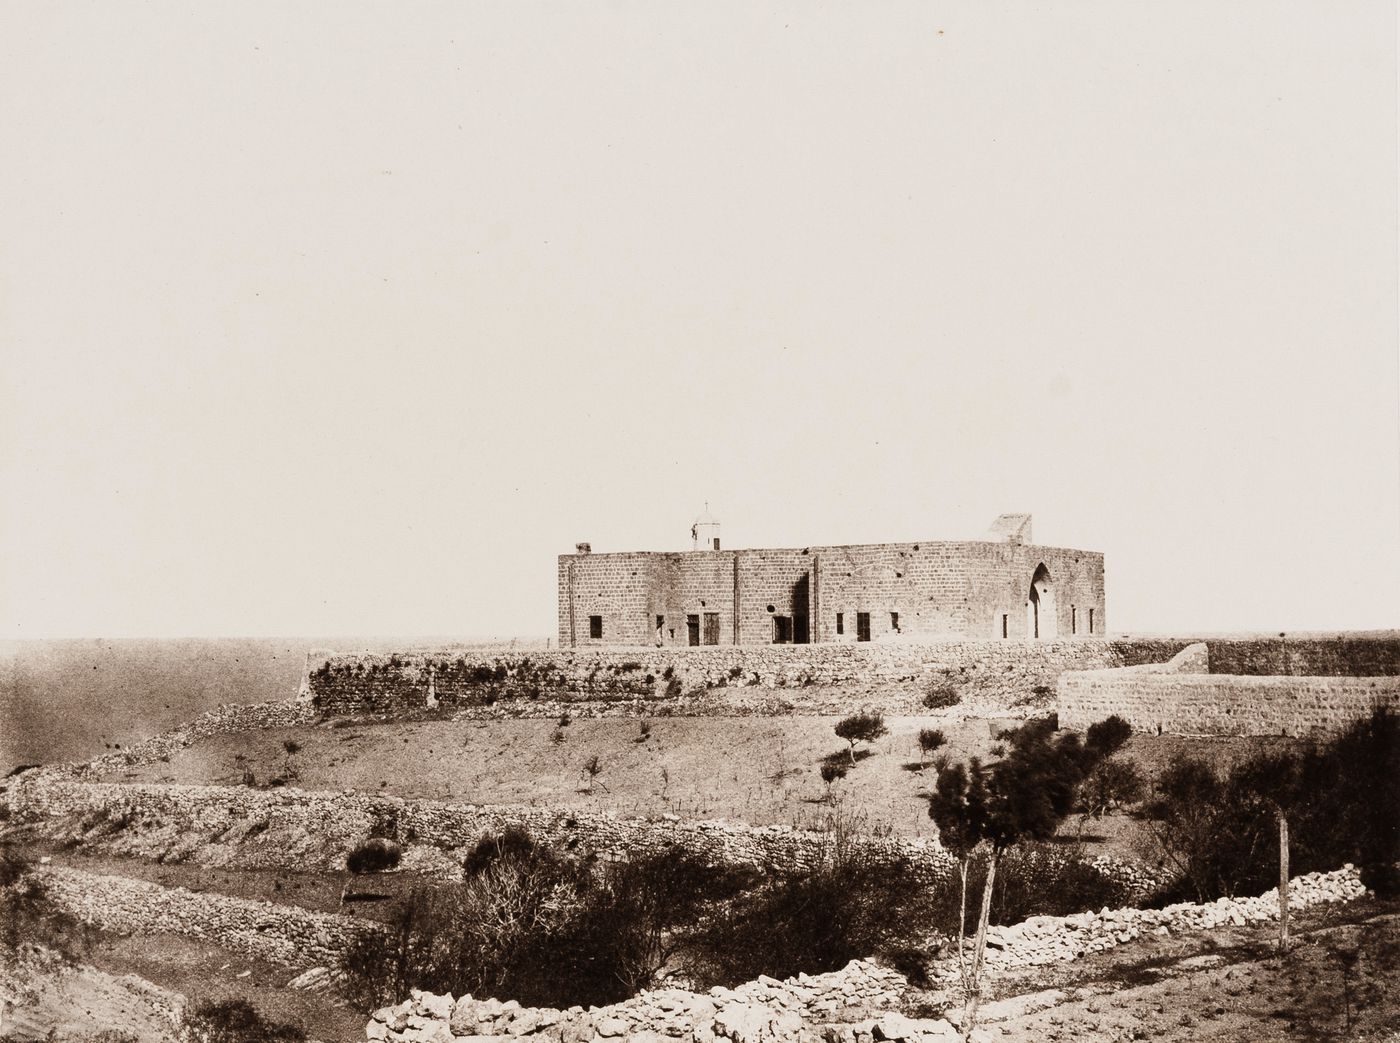 View of the palace of Abdallah Pasha on Mount Carmel, Ottoman Empire (now in Israel)